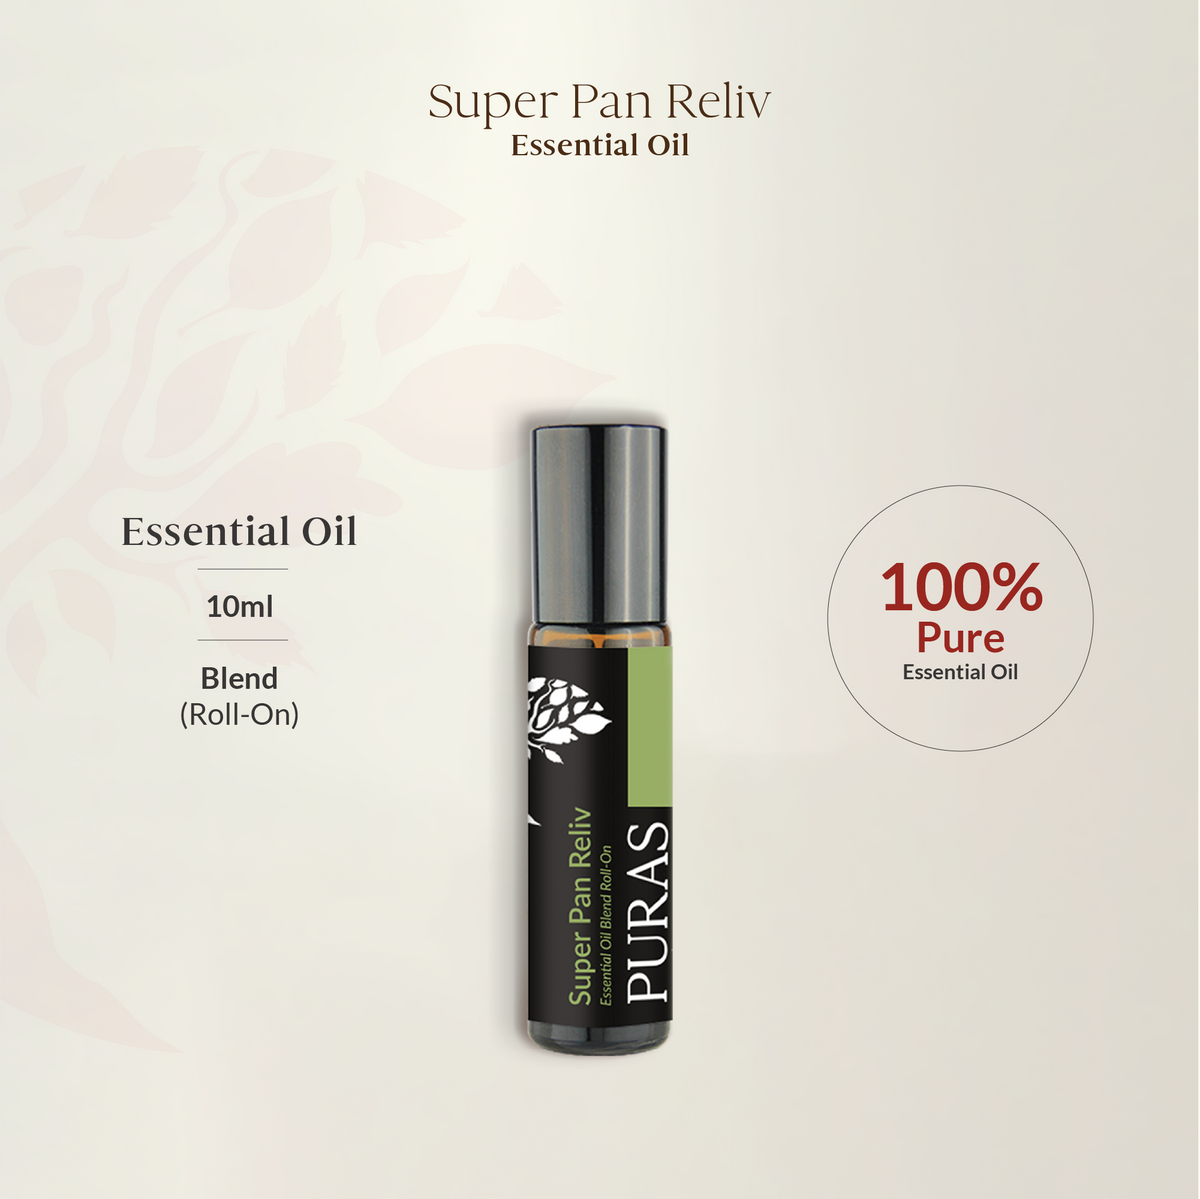 Super Pan Reliv Essential Oil Blend (Roll-On) 10ml